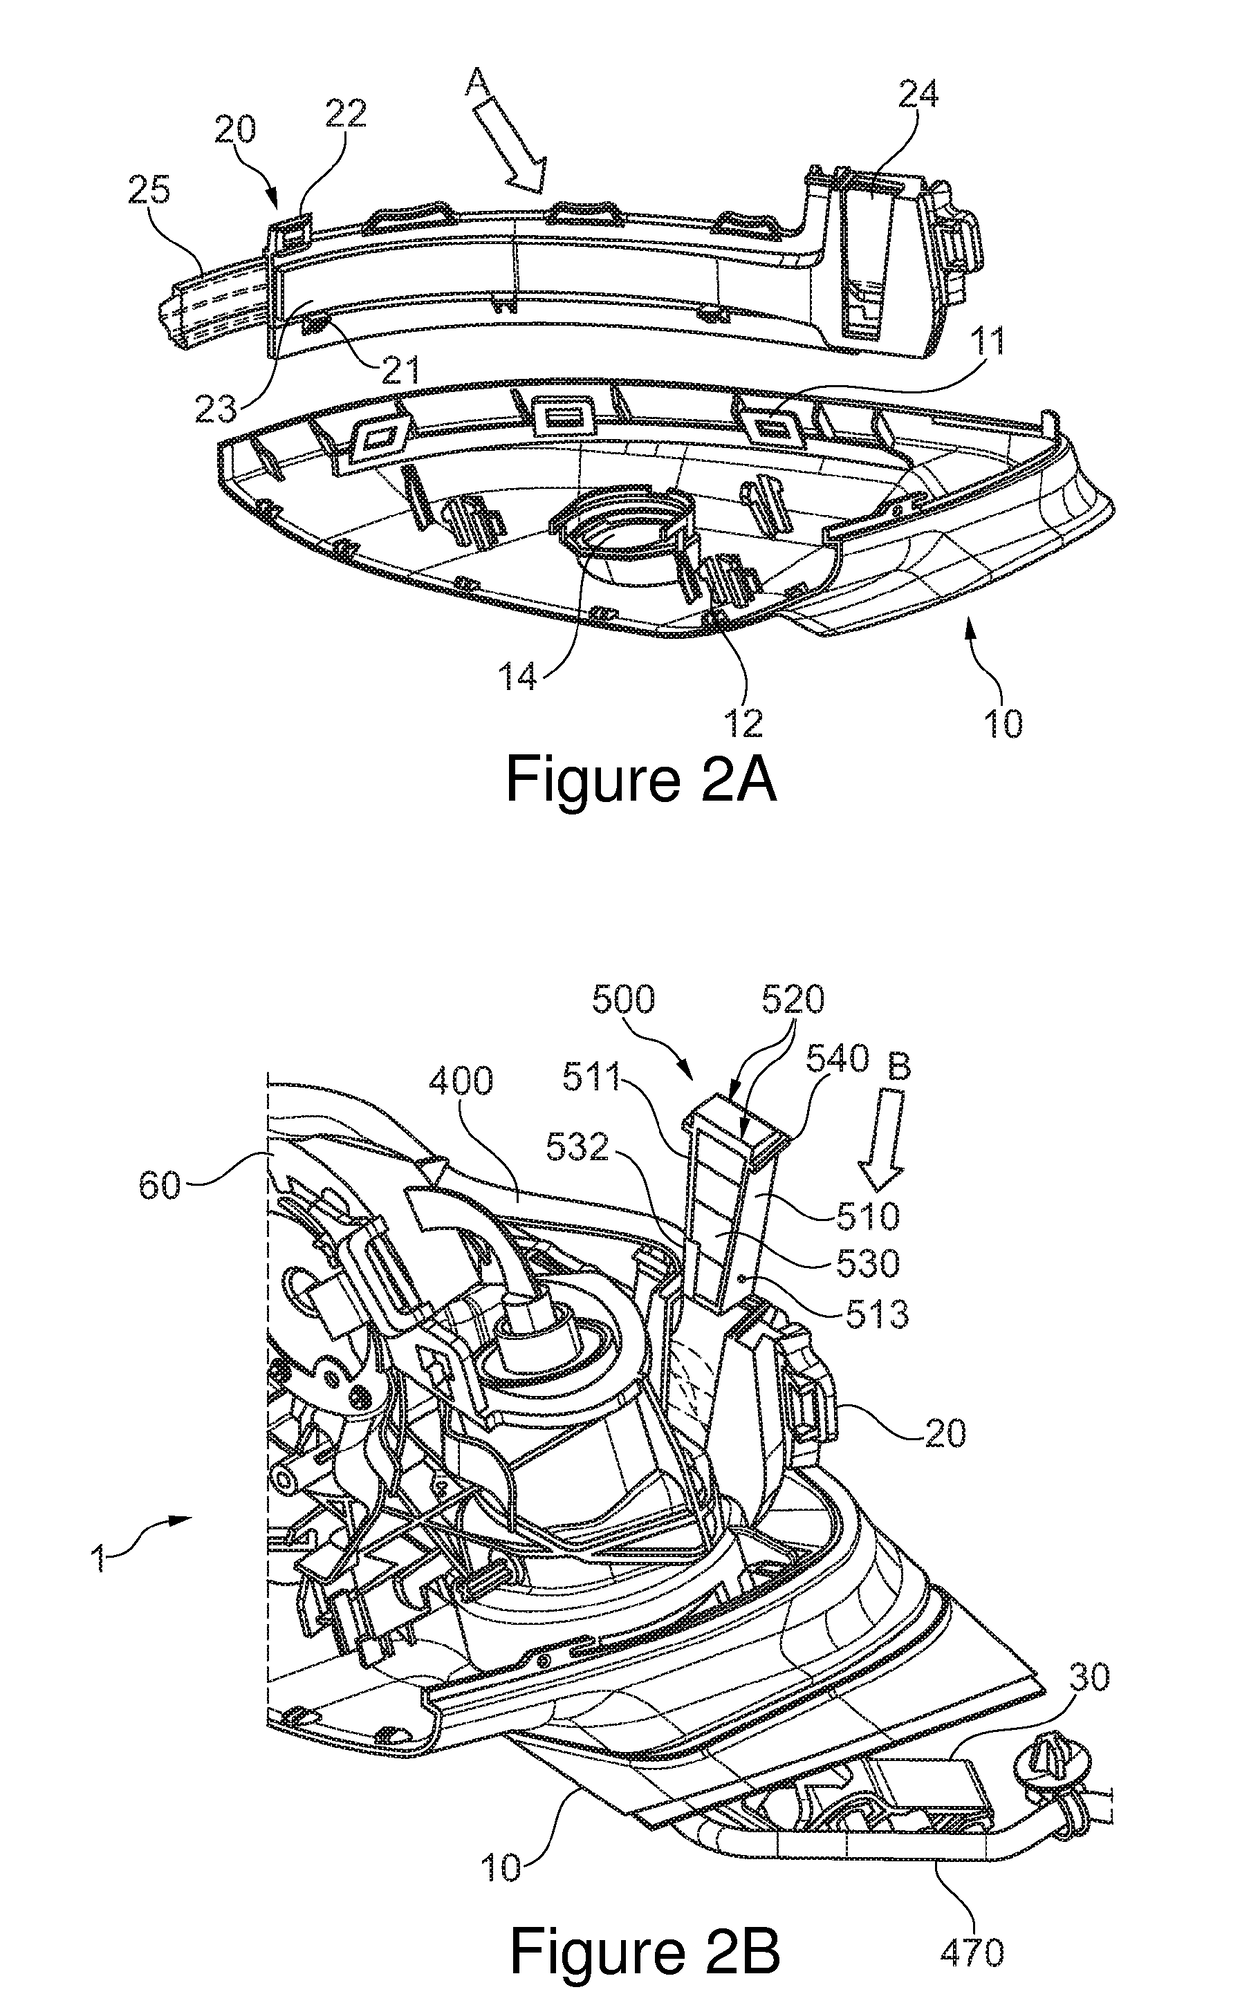 Method for manufacturing an automotive mirror